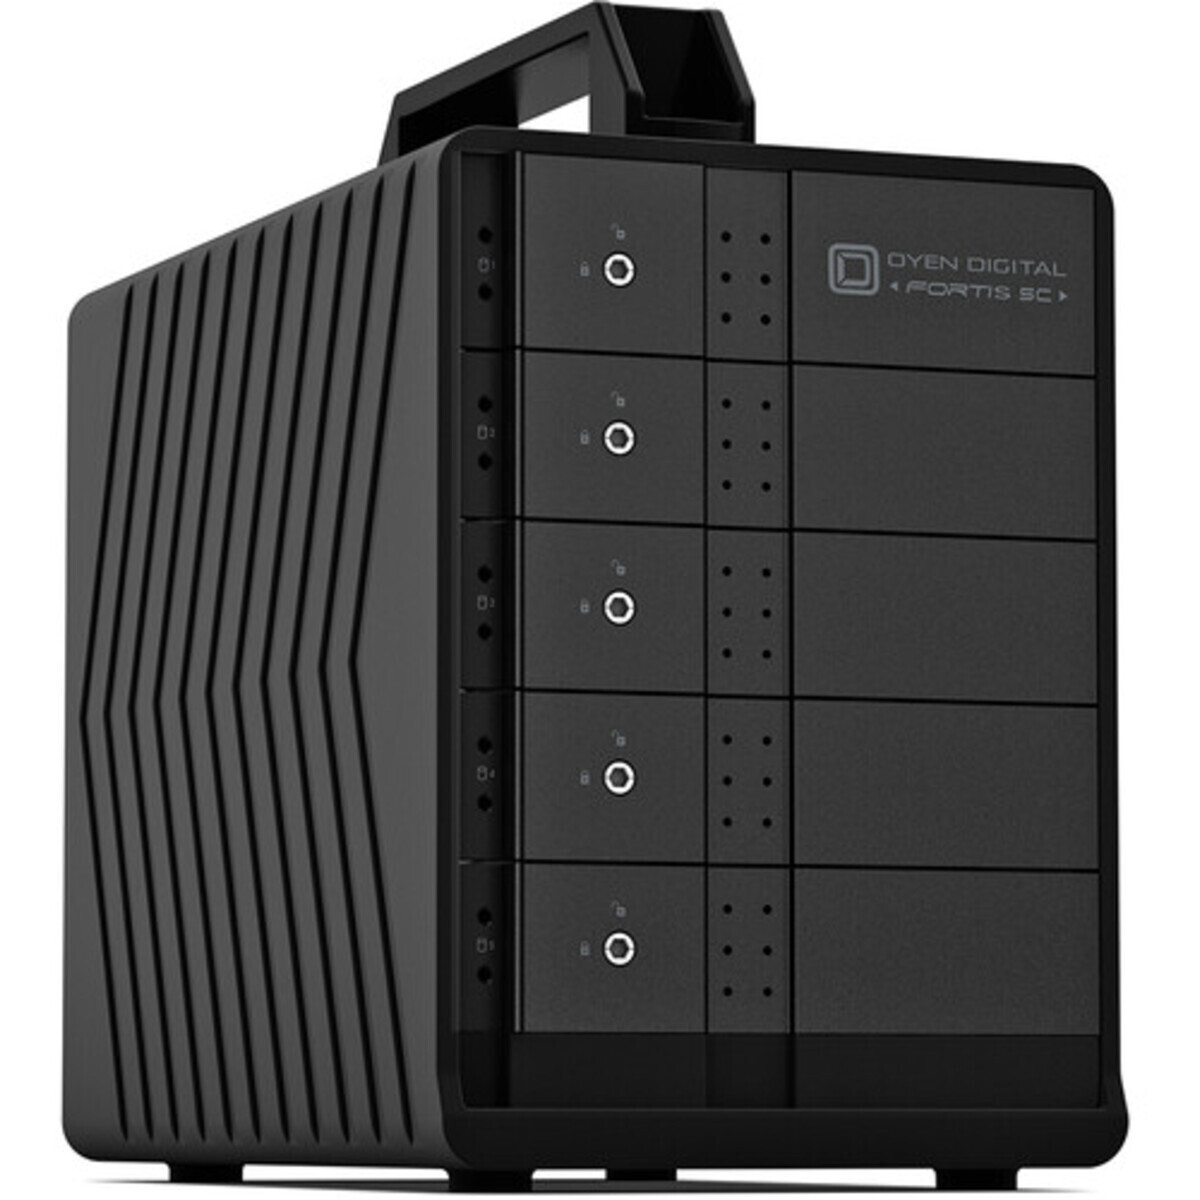 OYEN Fortis 5C 10tb 5-Bay Desktop Multimedia / Power User / Business DAS - Direct Attached Storage Device 5x2tb Western Digital Red SA500 WDS200T1R0A 2.5 560/530MB/s SATA 6Gb/s SSD NAS Class Drives Installed - Burn-In Tested Fortis 5C